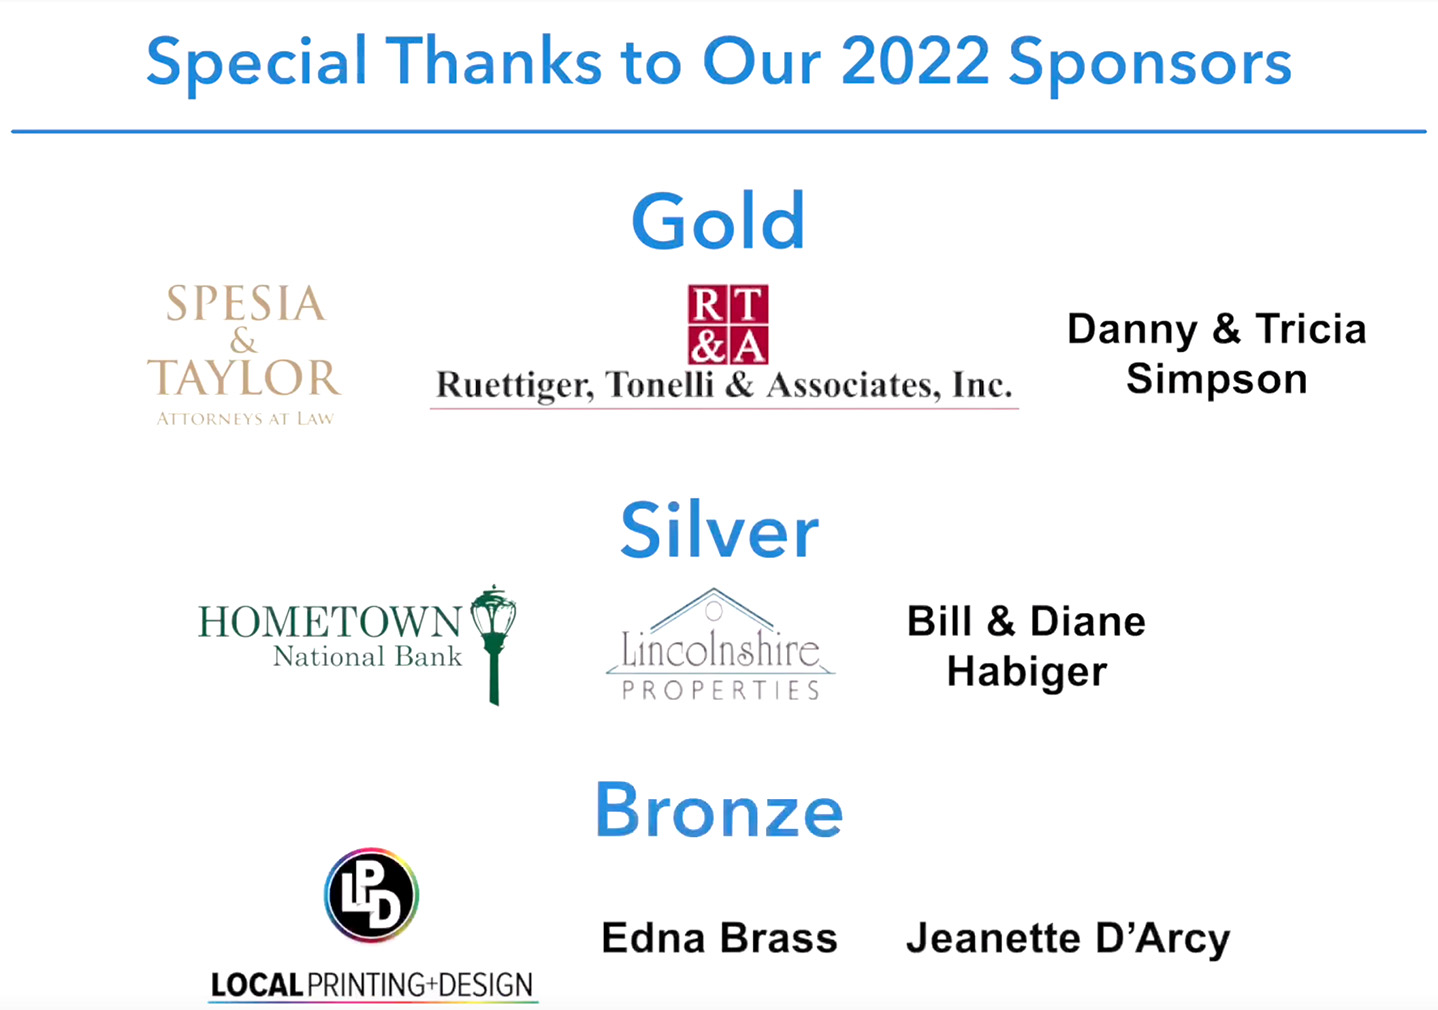 Thanks to our 2022 Sponsors